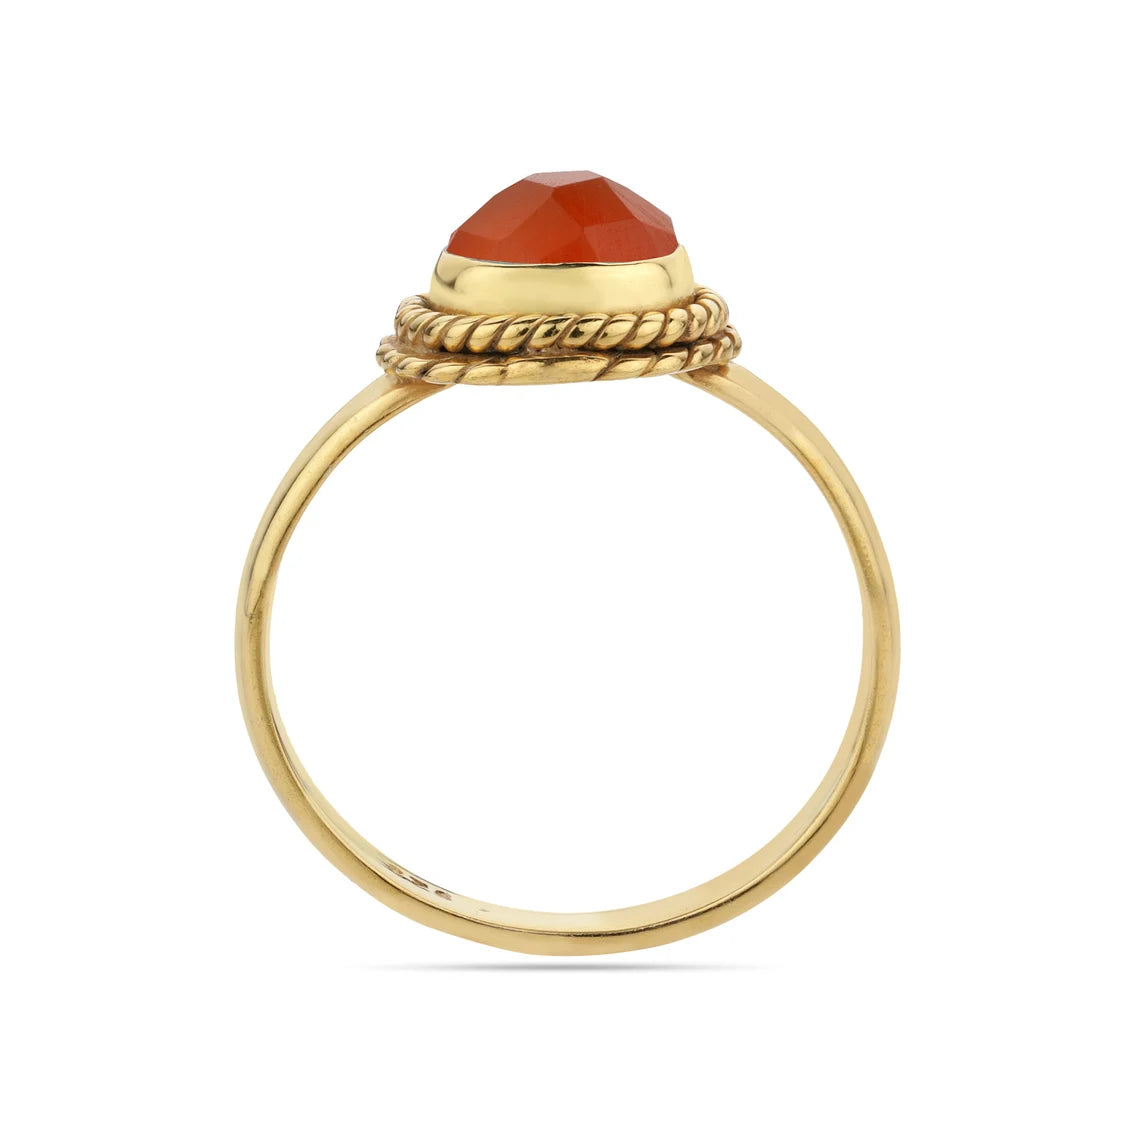 Round Checker Cut Carnelian Ring, Gold Plated Ring, Minimalist Ring, Delicate Ring, Dainty Ring, August Birthstone Ring